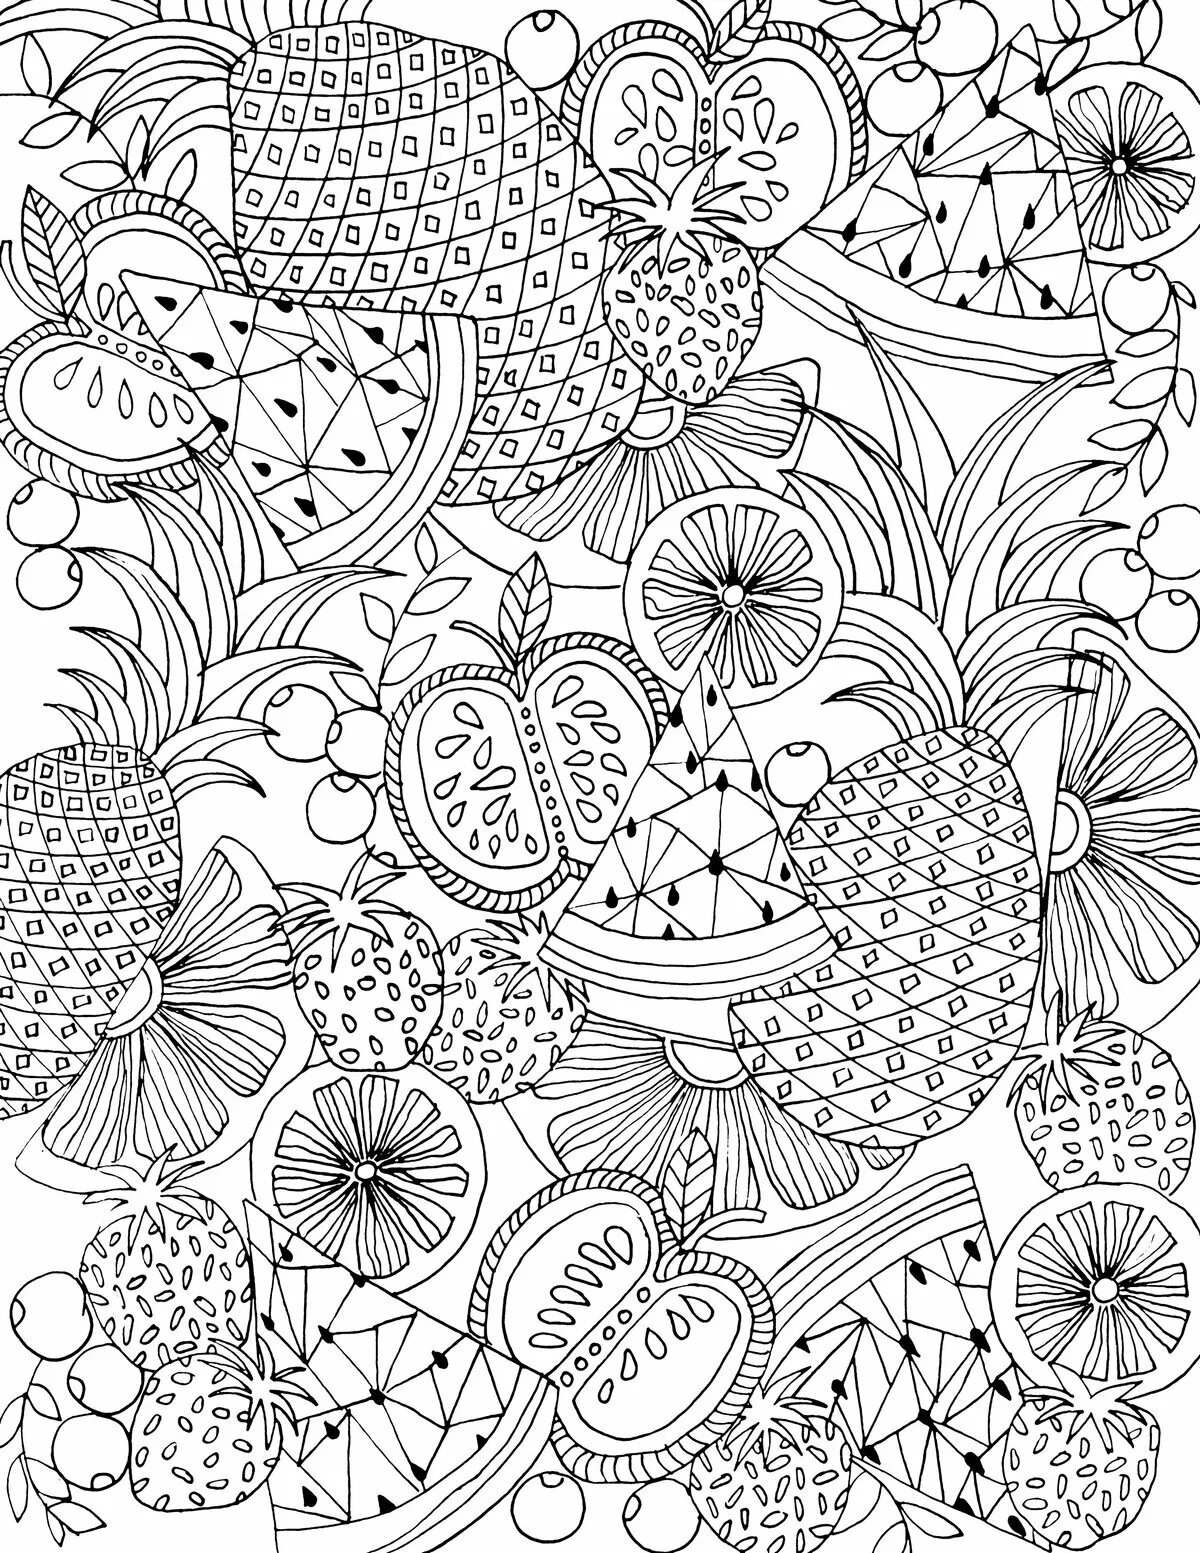 Attractive anti-stress coloring book for adults